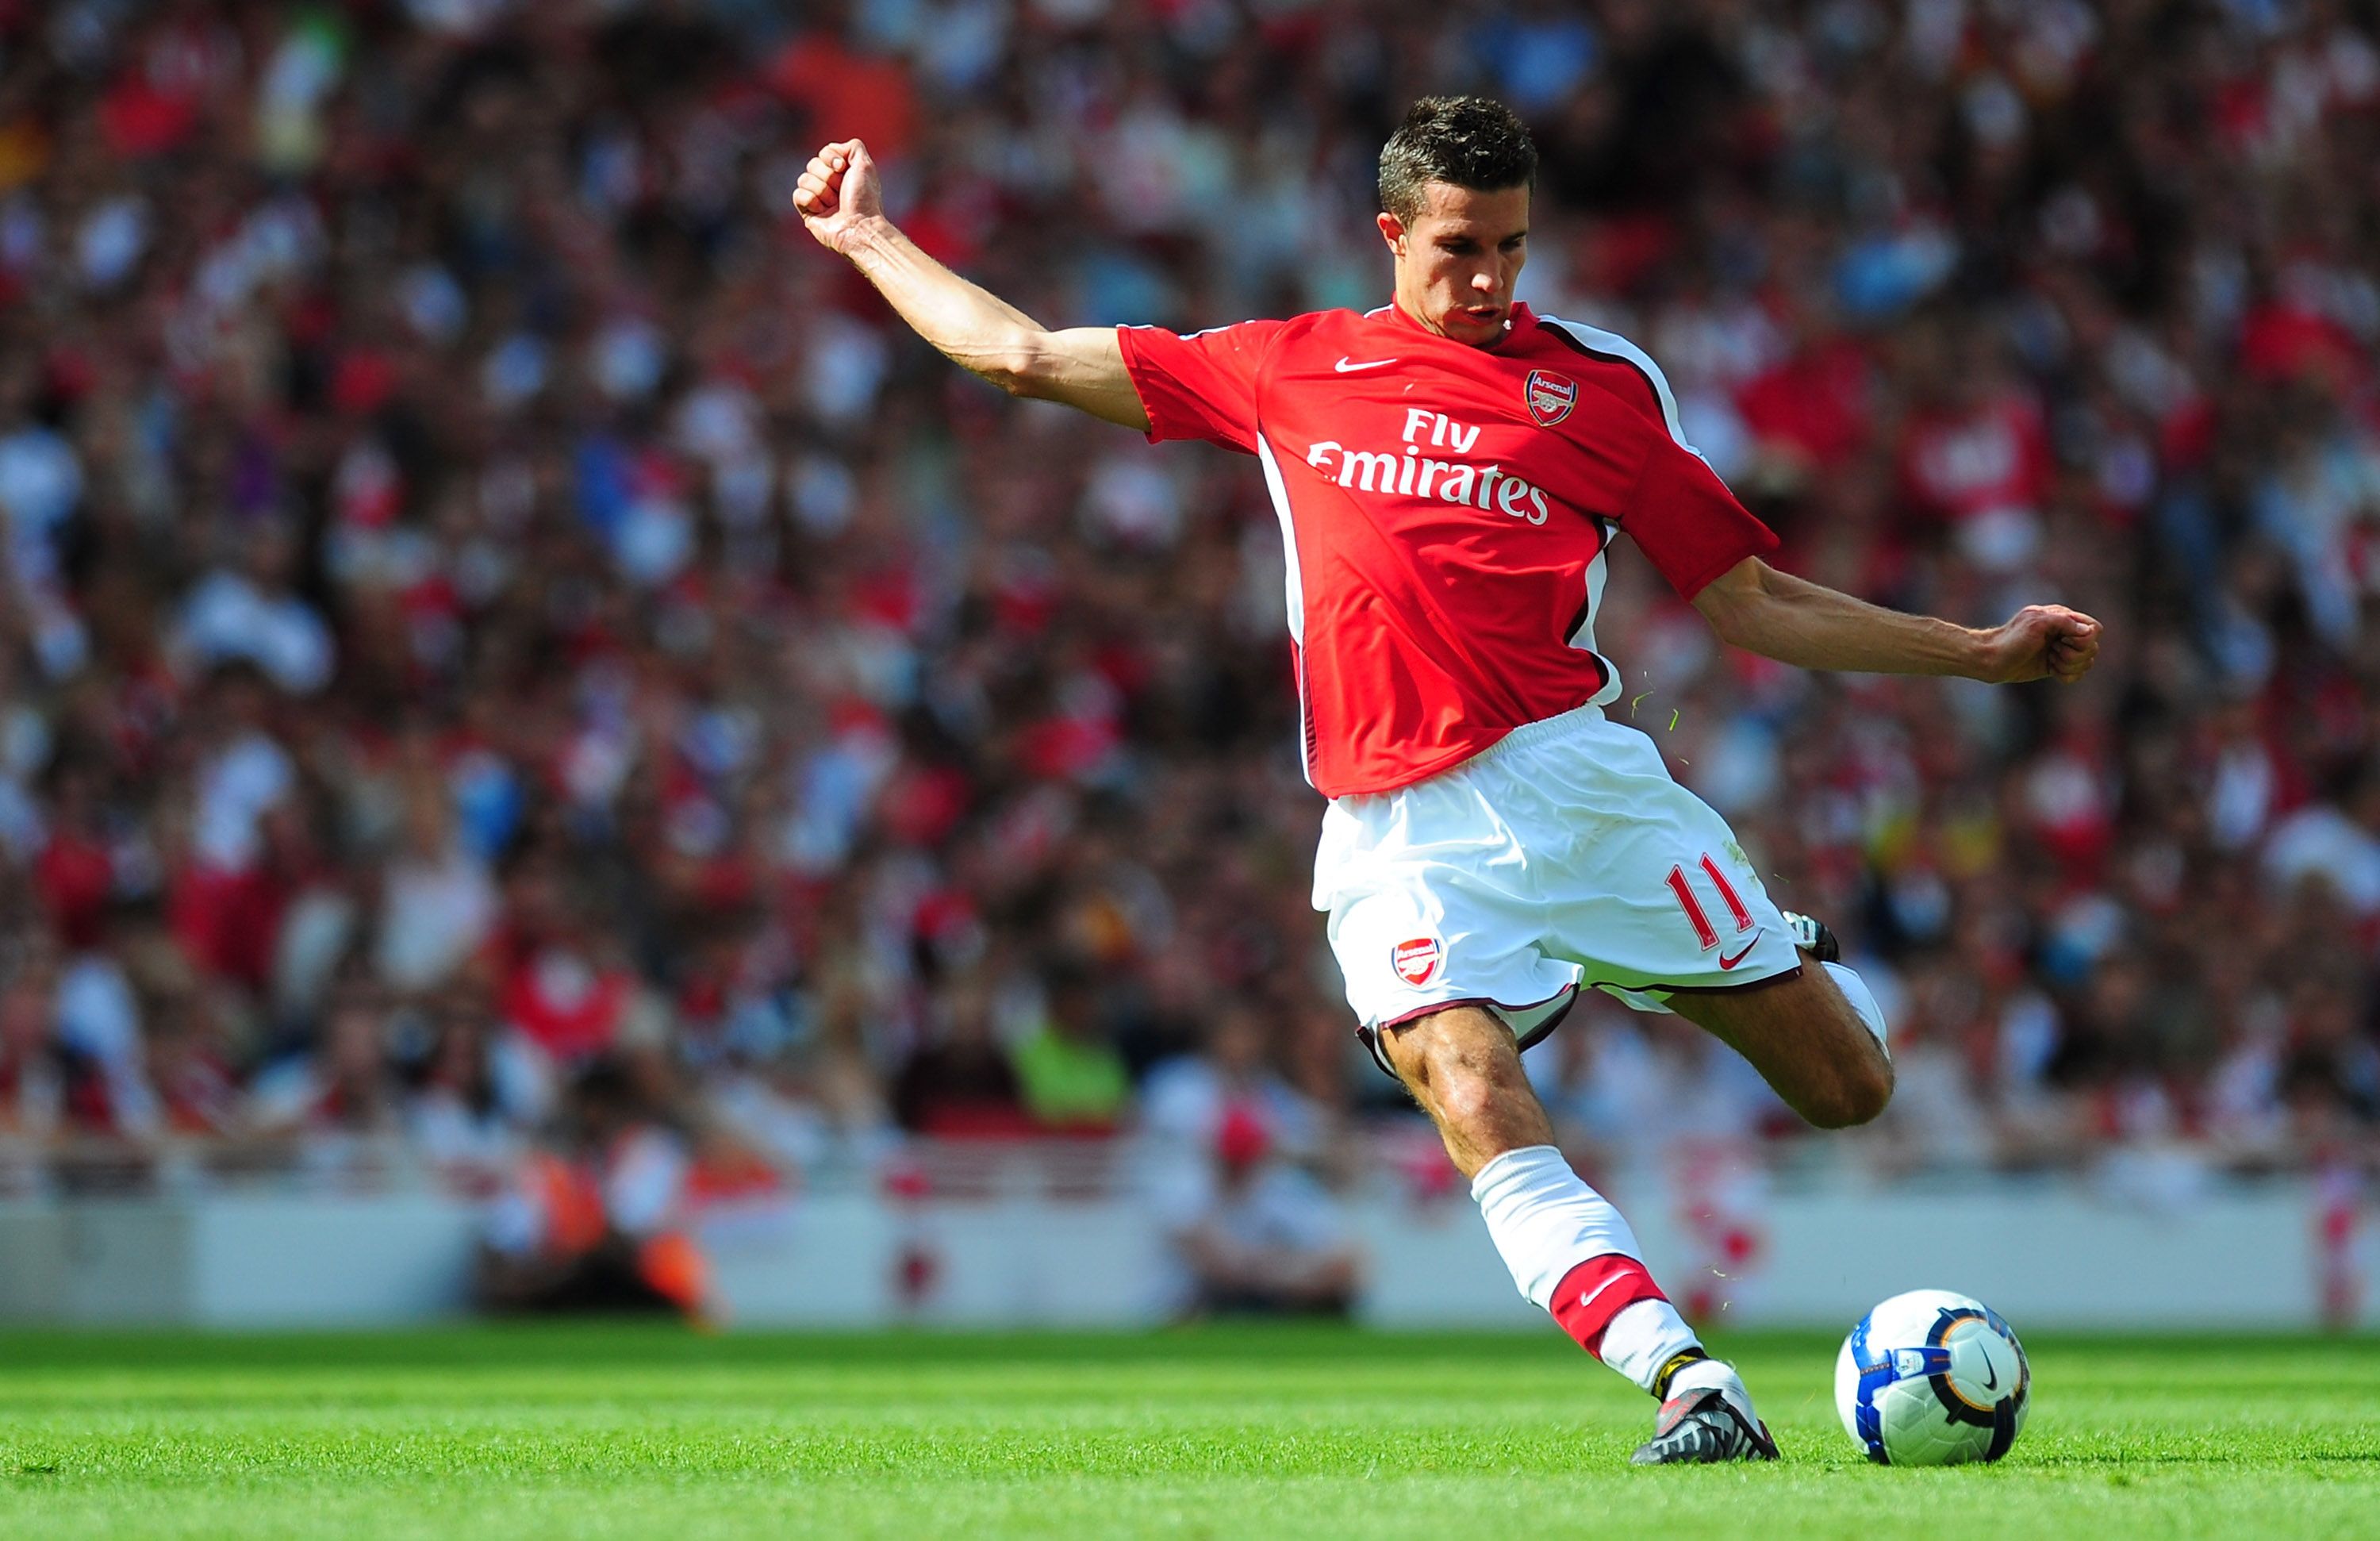 Robin van Persie of Arsenal crosses the ball during a match